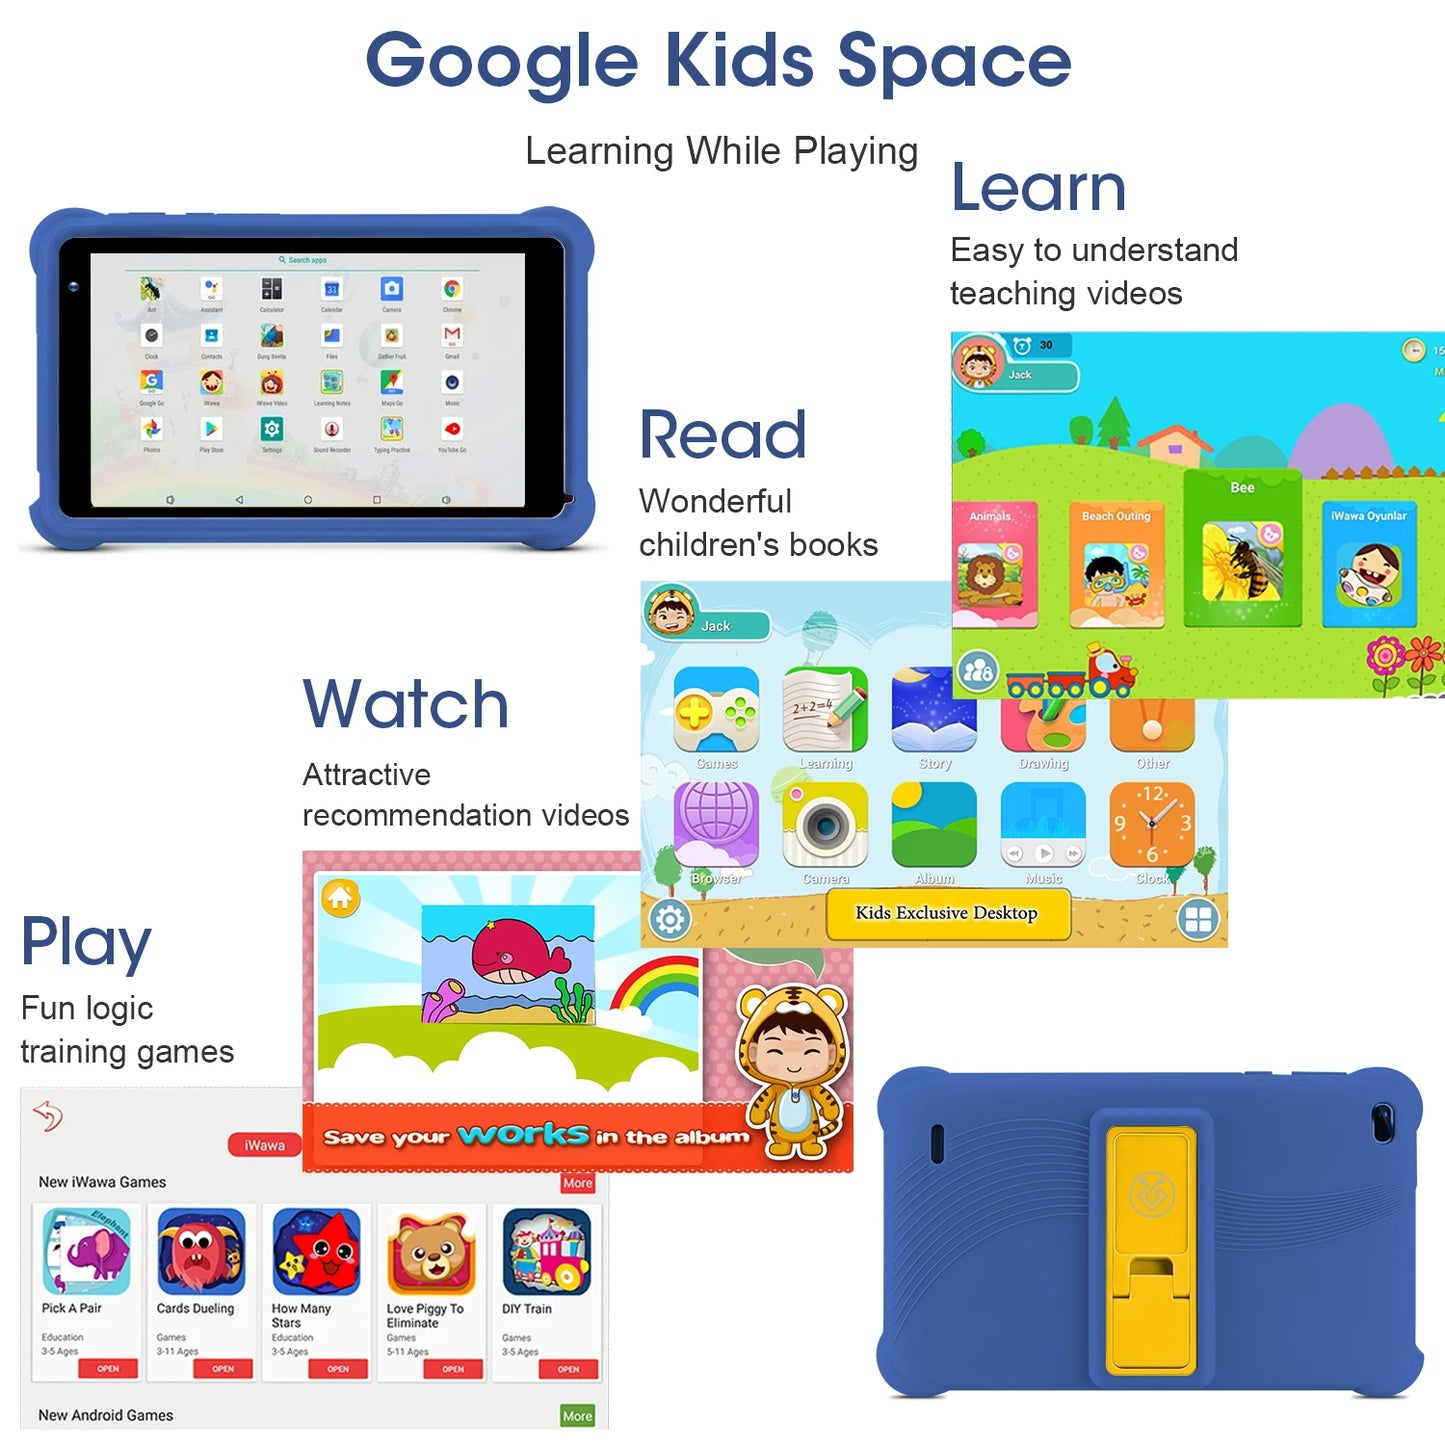 Android Kids Tablet PC For Study Education Children Tablet With Silicone Case 2+32GB Google Play WiFi Tablet with Holder